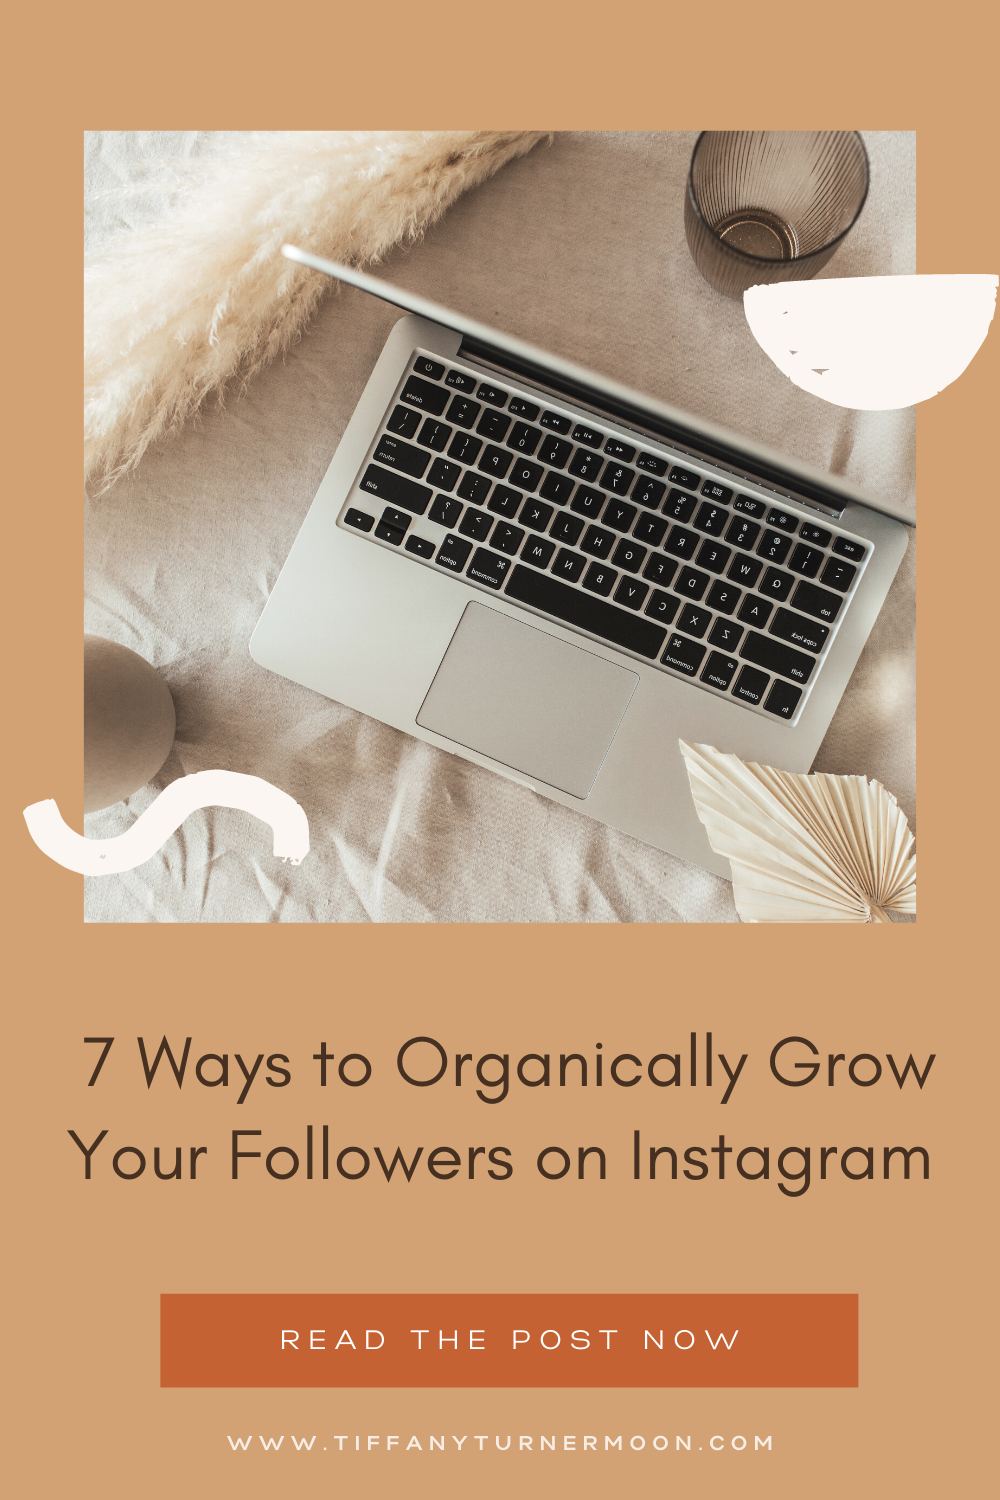 collage with laptop and text 7 Ways to Organically Grow your Followers on Instagram